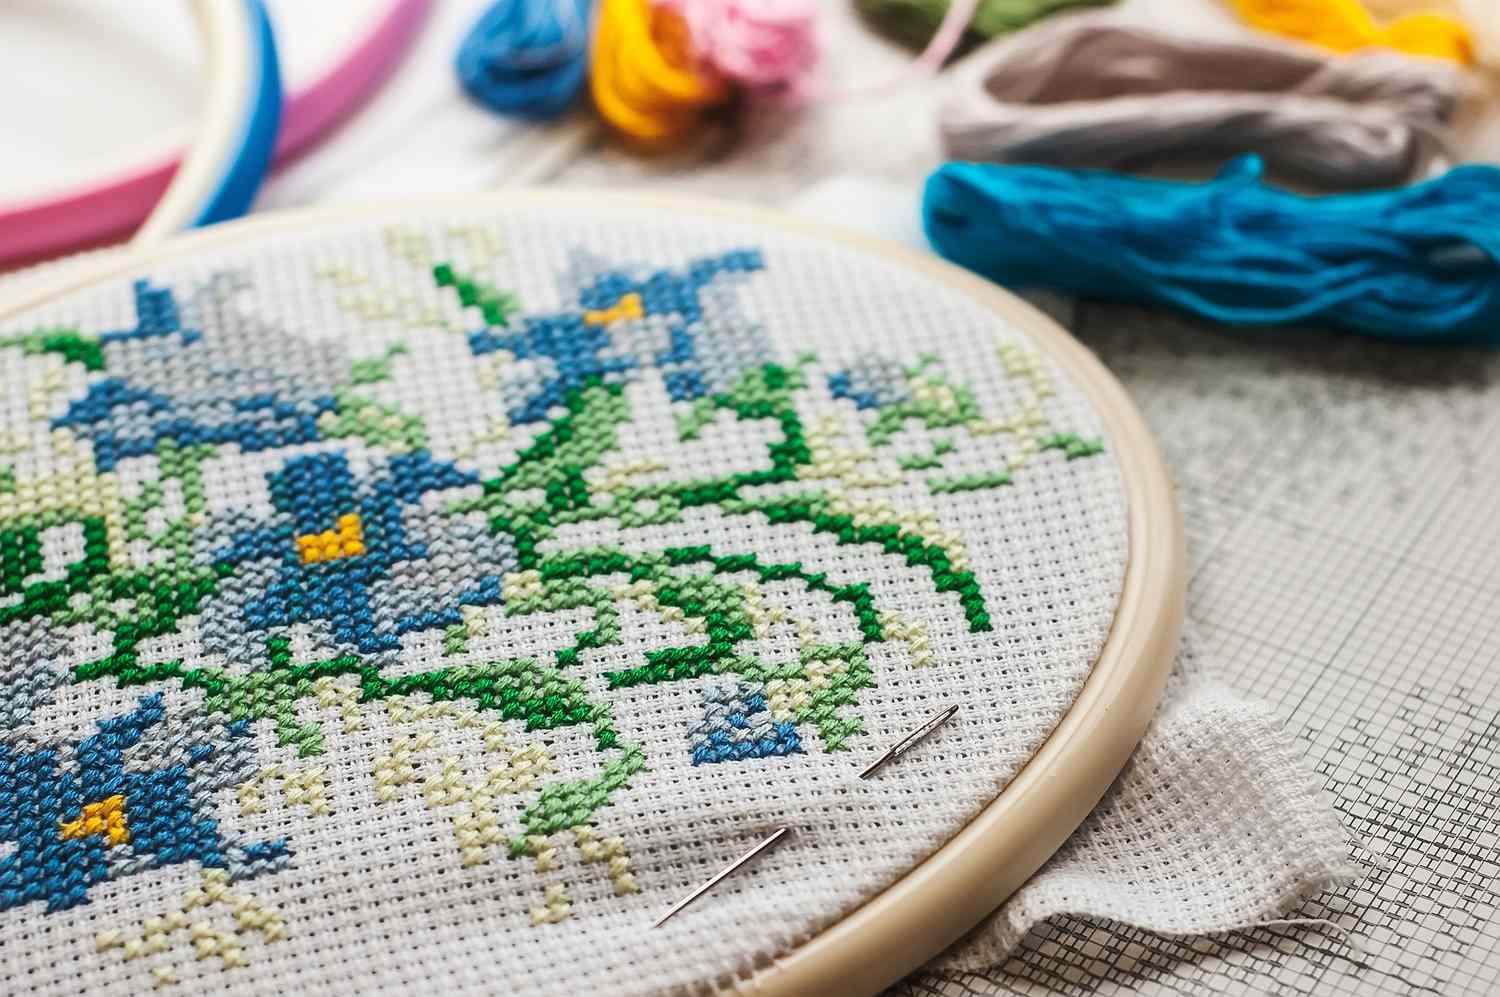 A close-up of a floral cross stitch project